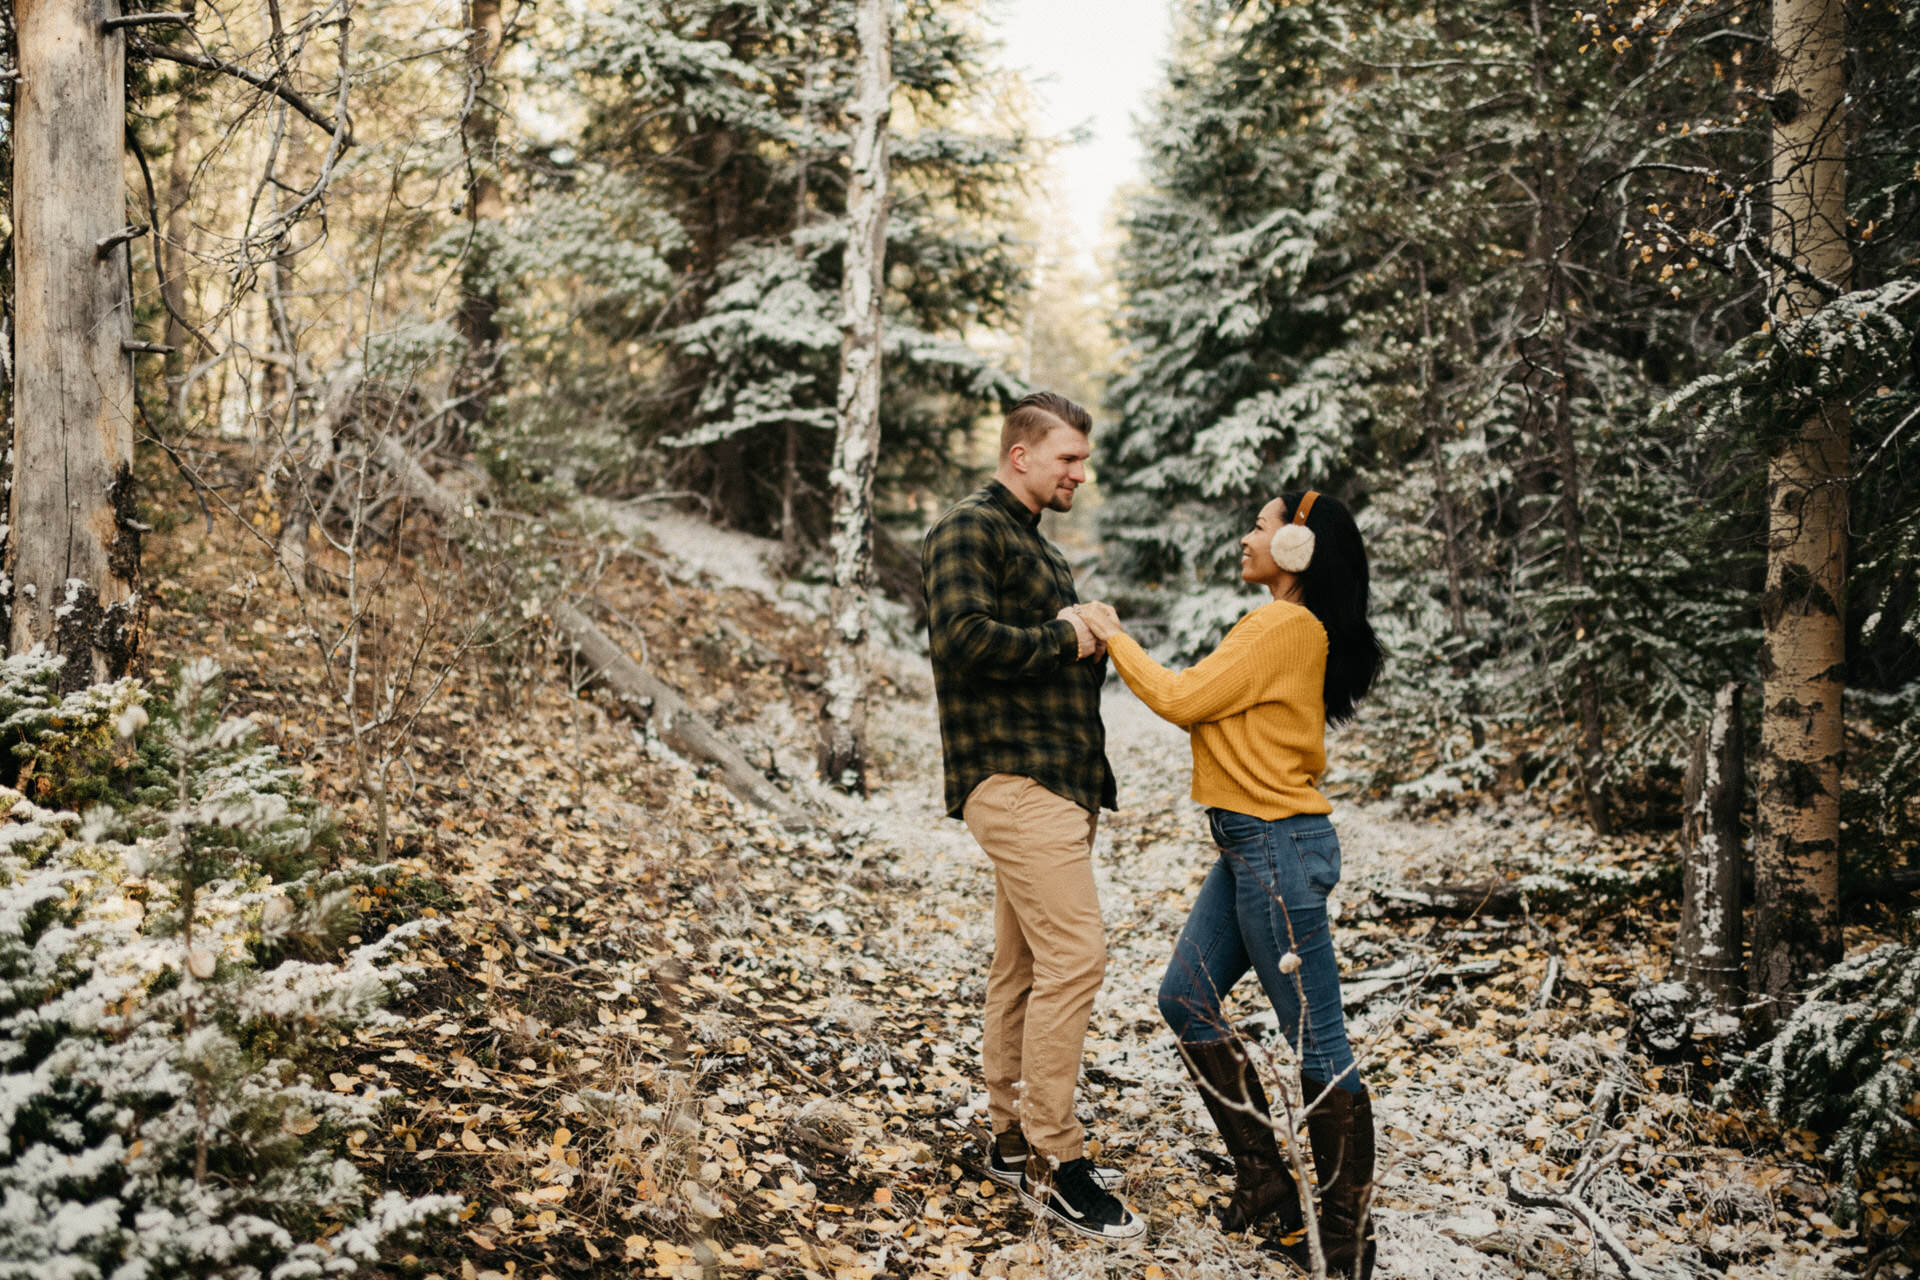 kelsey-rob-snowy-fall-leaves-evergreen-colorado-engagement-session-15.jpg